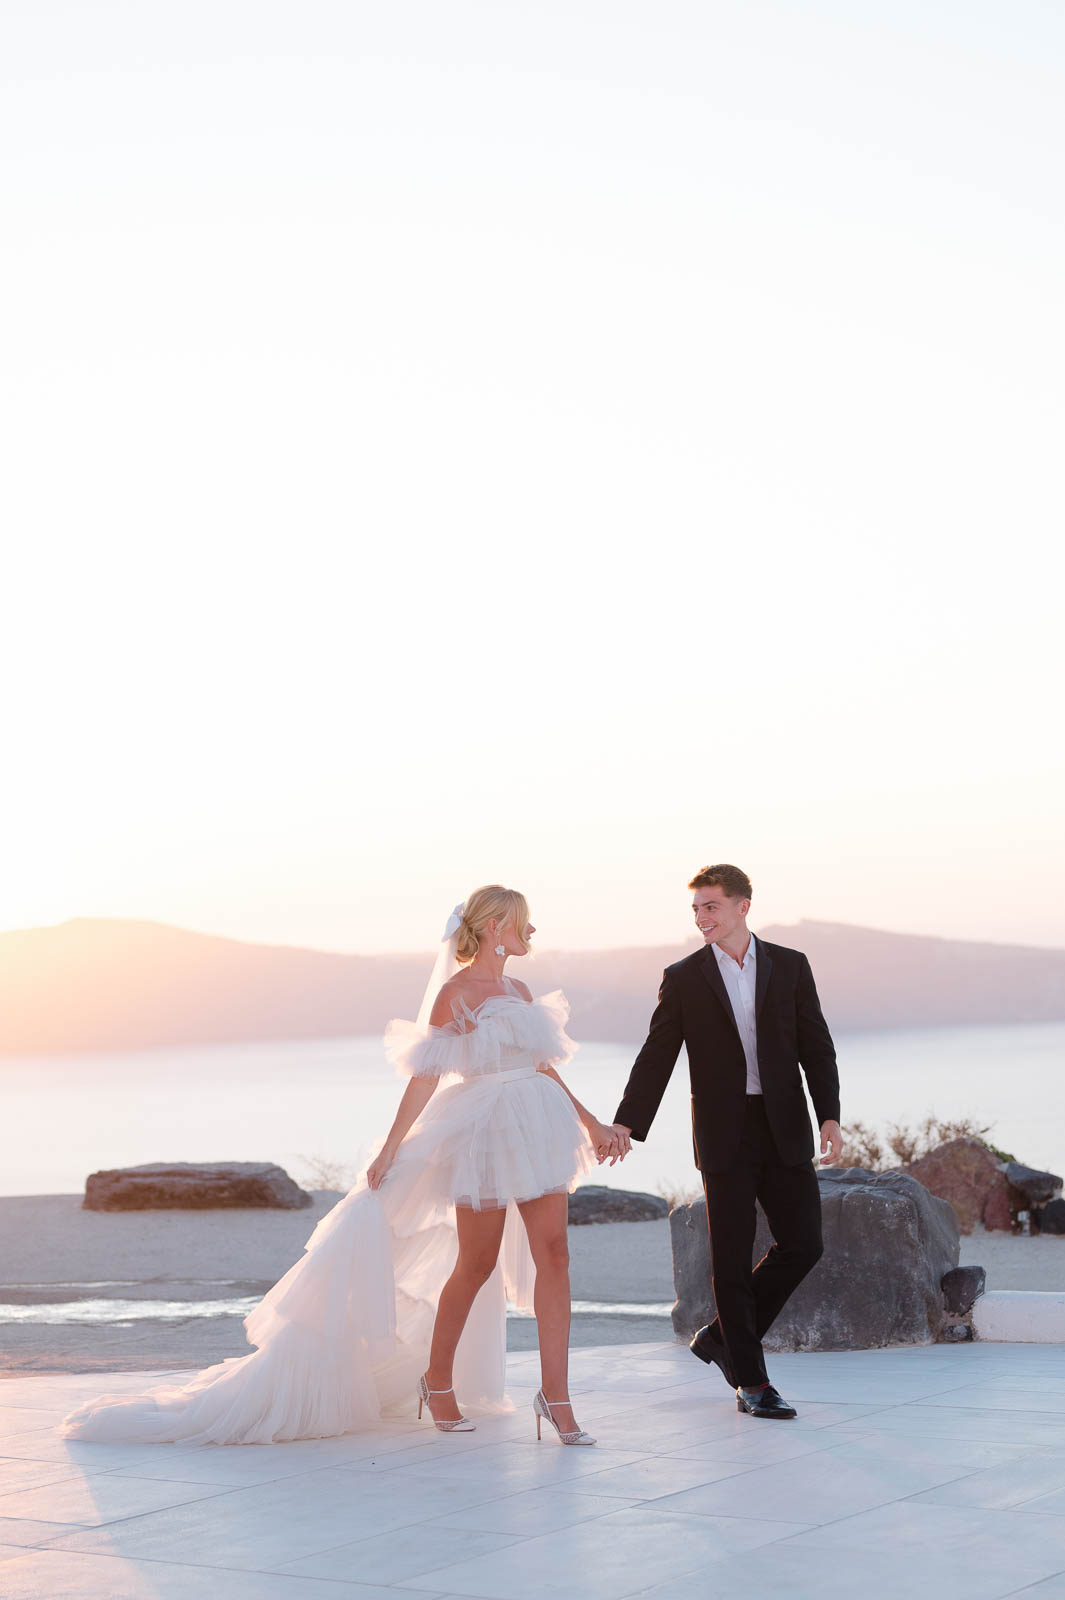 Golden Hour Wedding Photos in Santorini, Greece by Lily Laidlaw Photography.